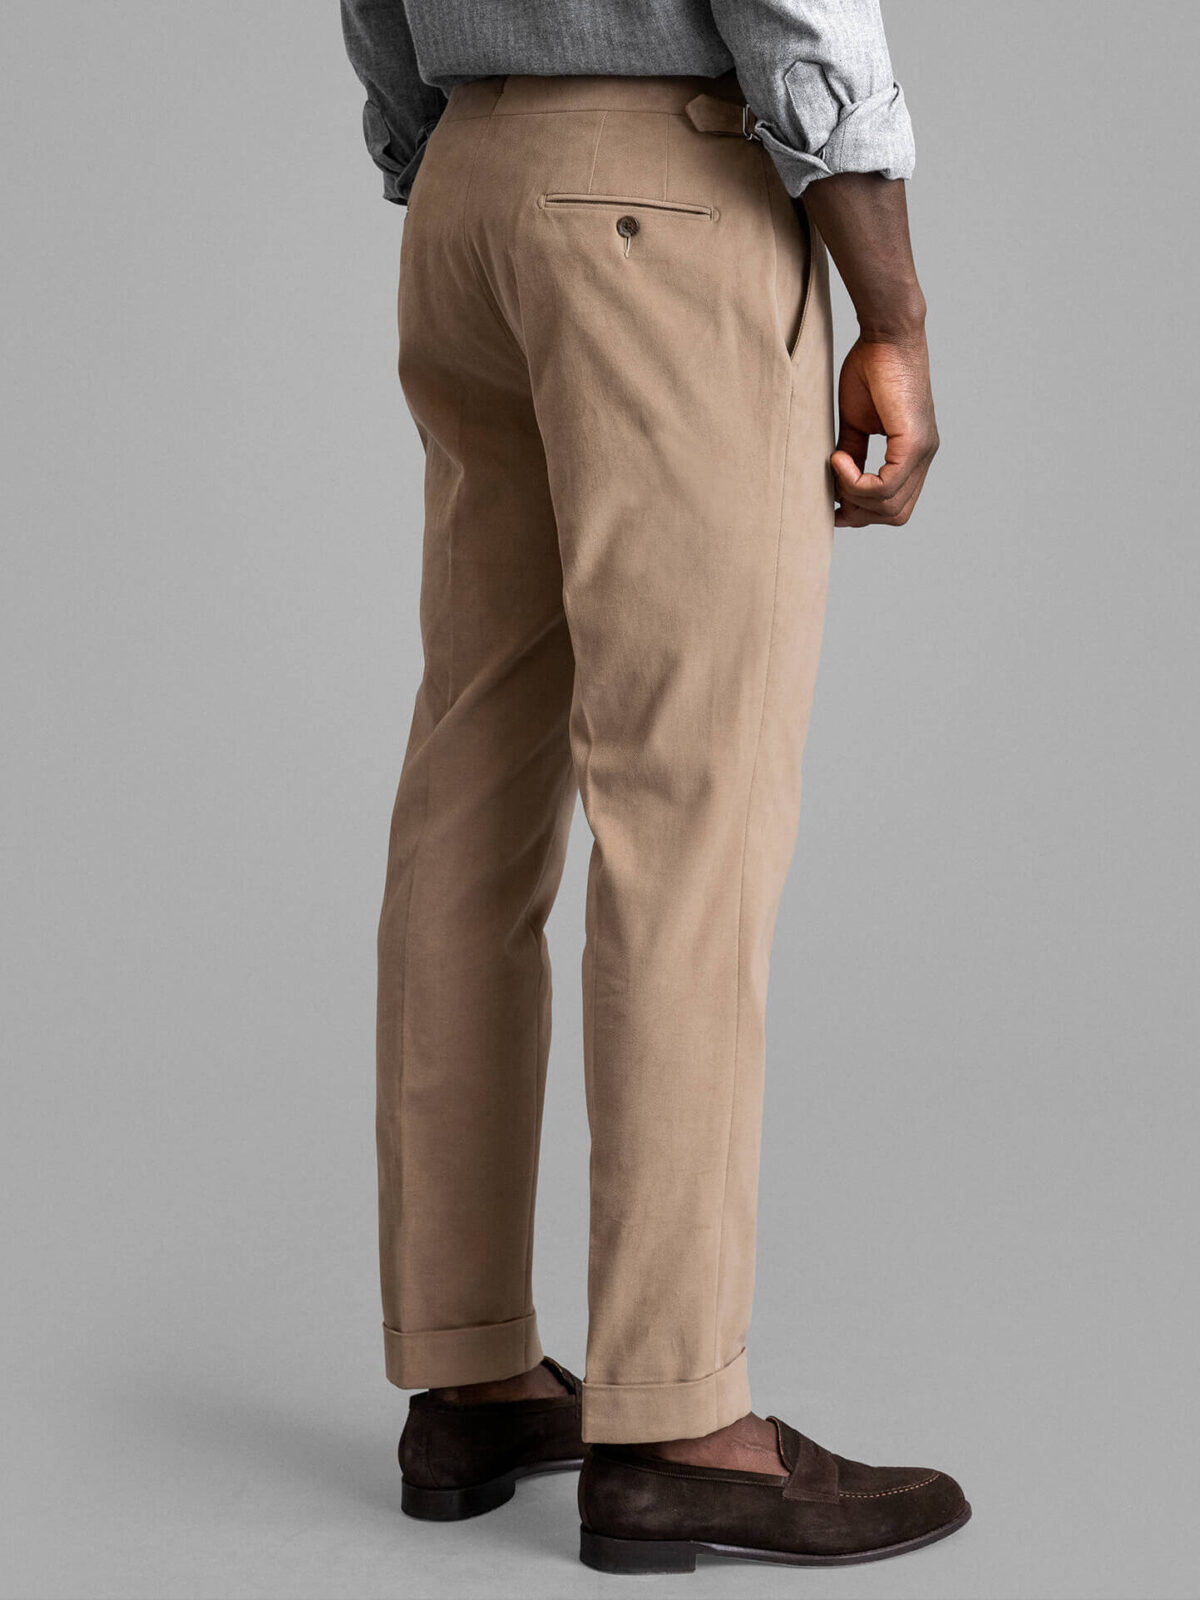 Beige Heavy Brushed Cotton Stretch Dress Pant - Custom Fit Tailored Clothing